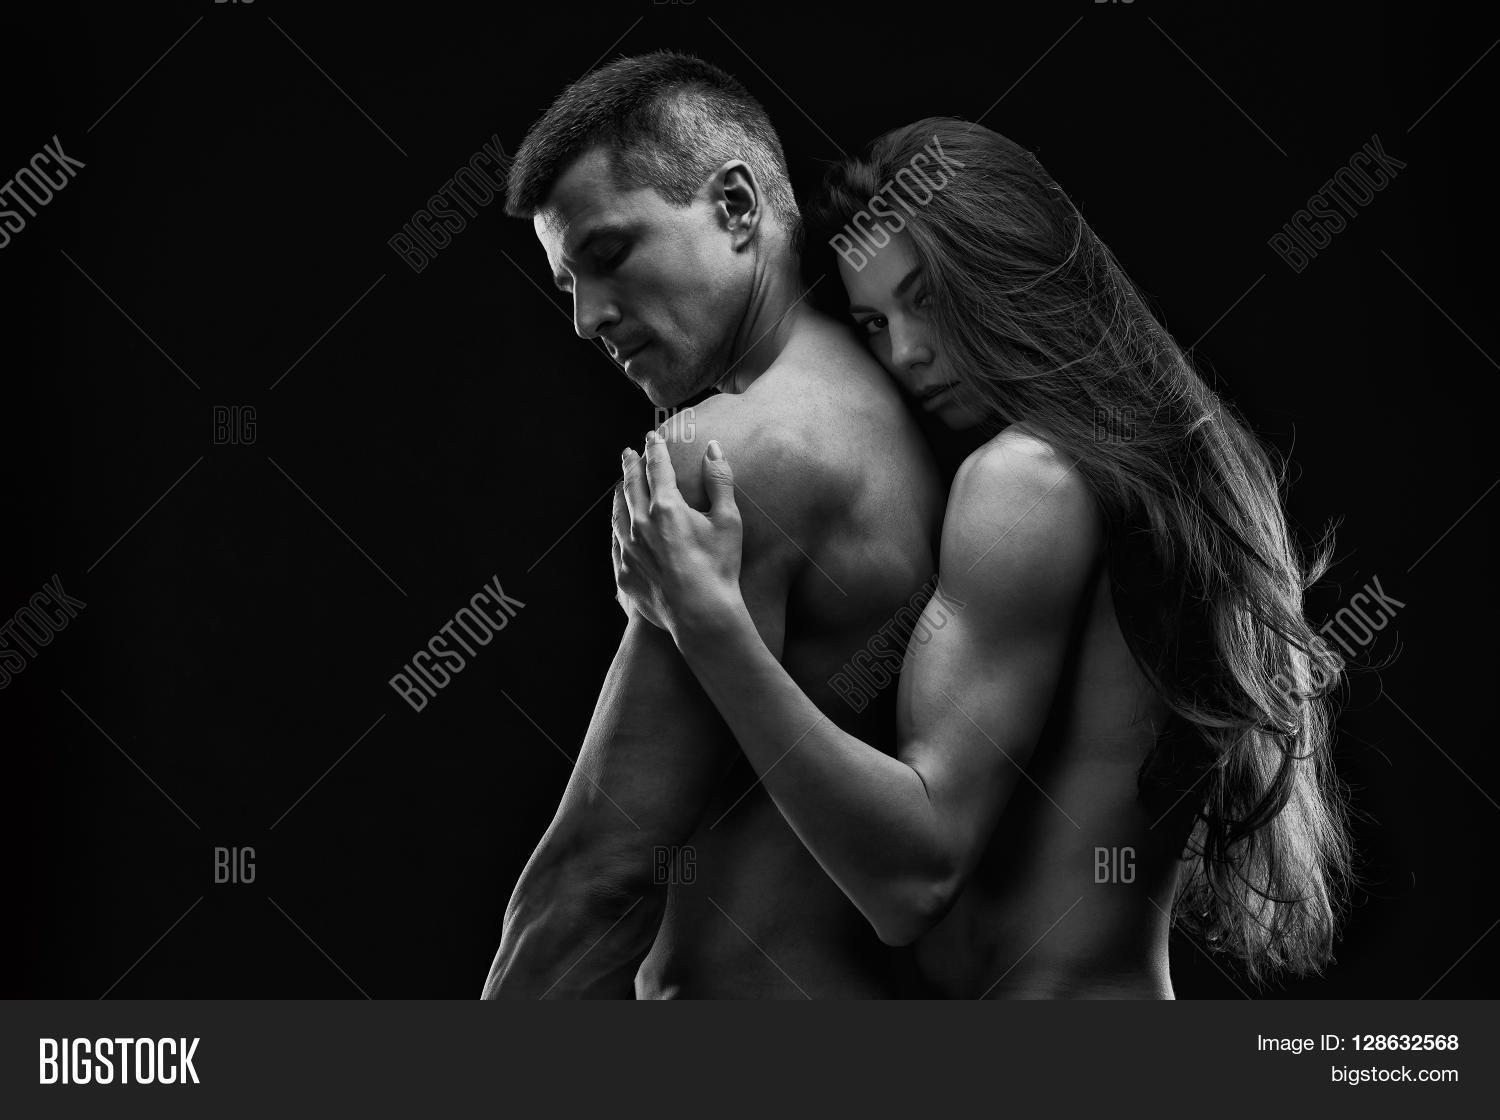 Nude Sexy Couple Art Photo Of Young Adult Man And Woman High Contrast Black